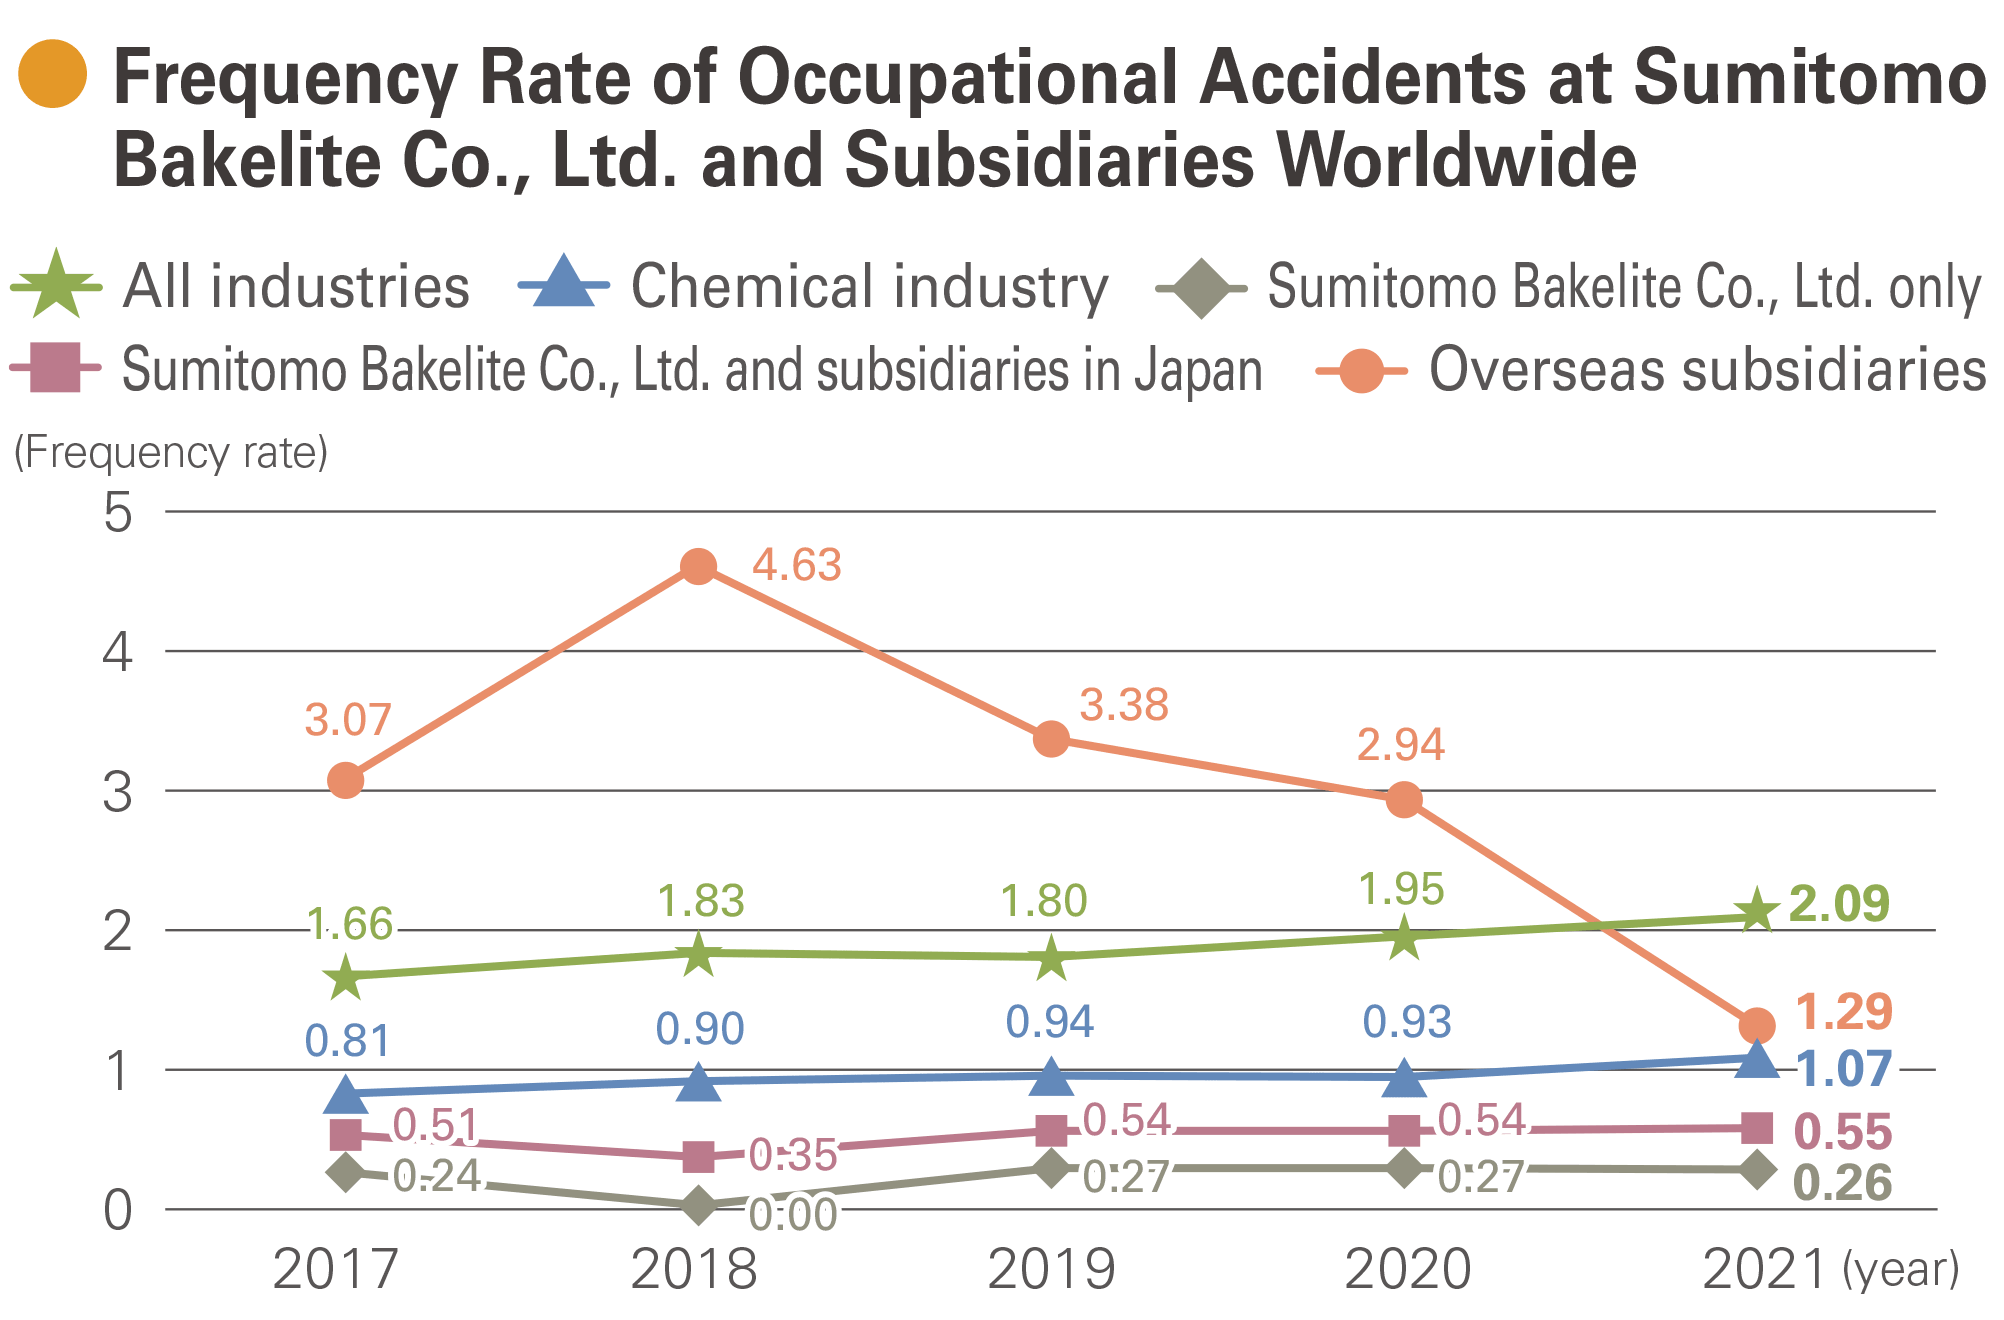 Frequency Rate of Occupational Accidents at Sumitomo Bakelite Co., Ltd. and Subsidiaries Worldwide